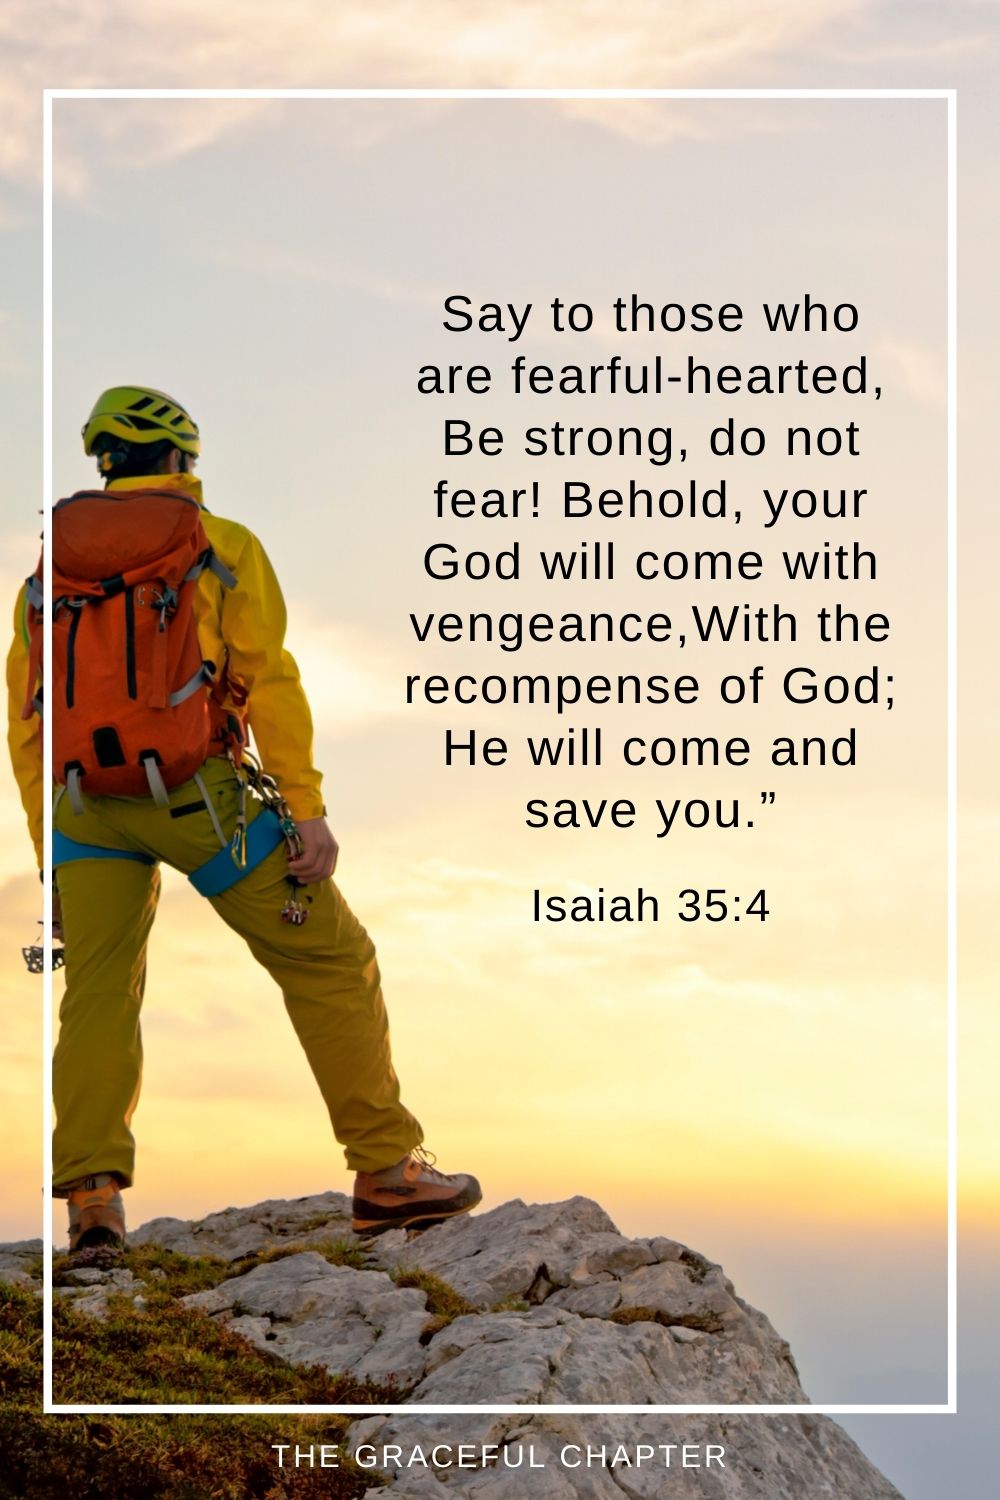 Say to those who are fearful-hearted, Be strong, do not fear! Behold, your God will come with vengeance, With the recompense of God; He will come and save you.” Isaiah 35:4